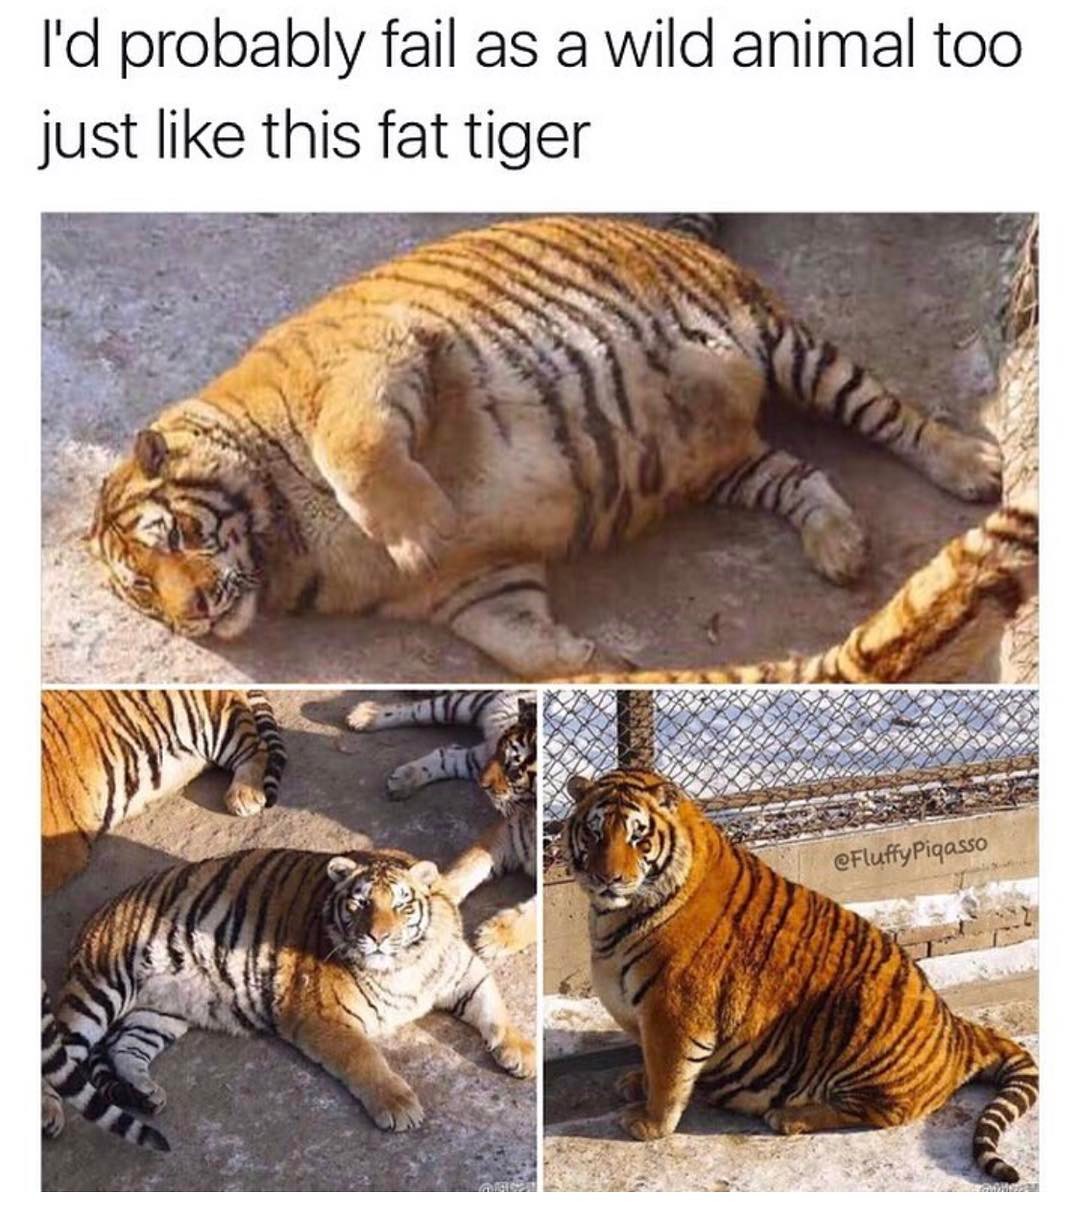 I'd probably fail as a wild animal too just like this fat tiger. - Funny